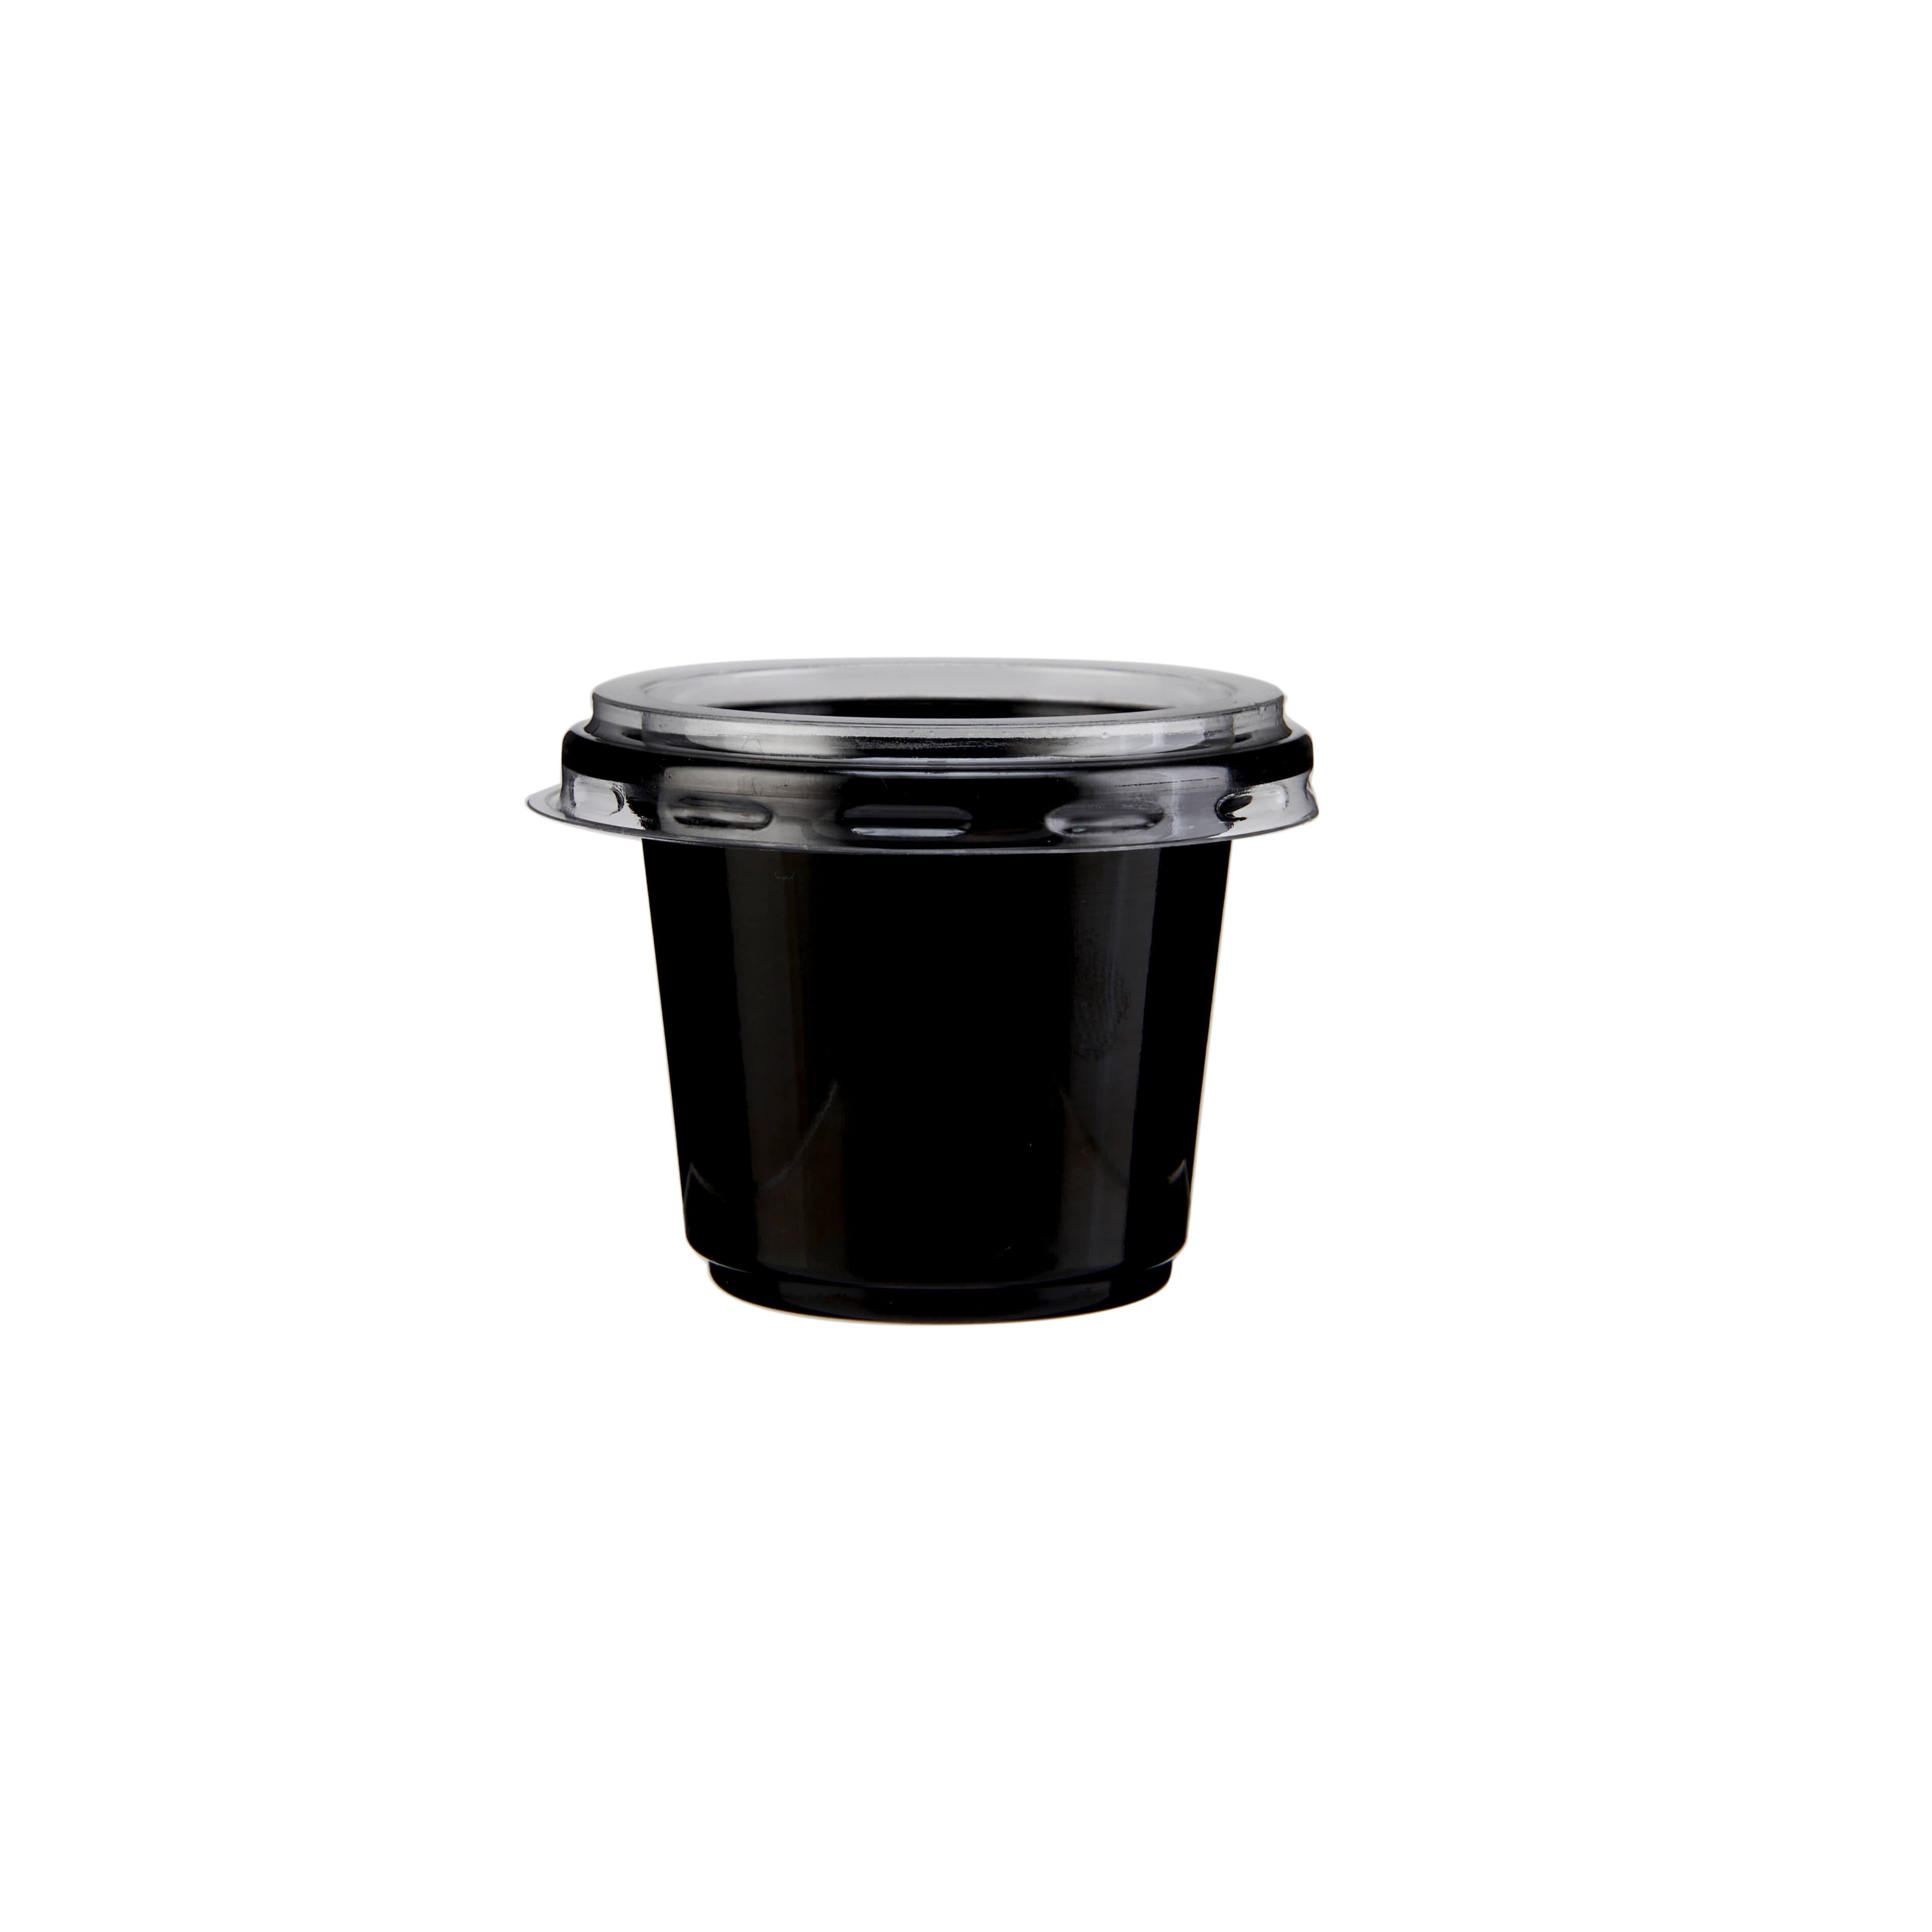 1Oz Black base PET portion cup for sauces, condiments - Hotpack Global